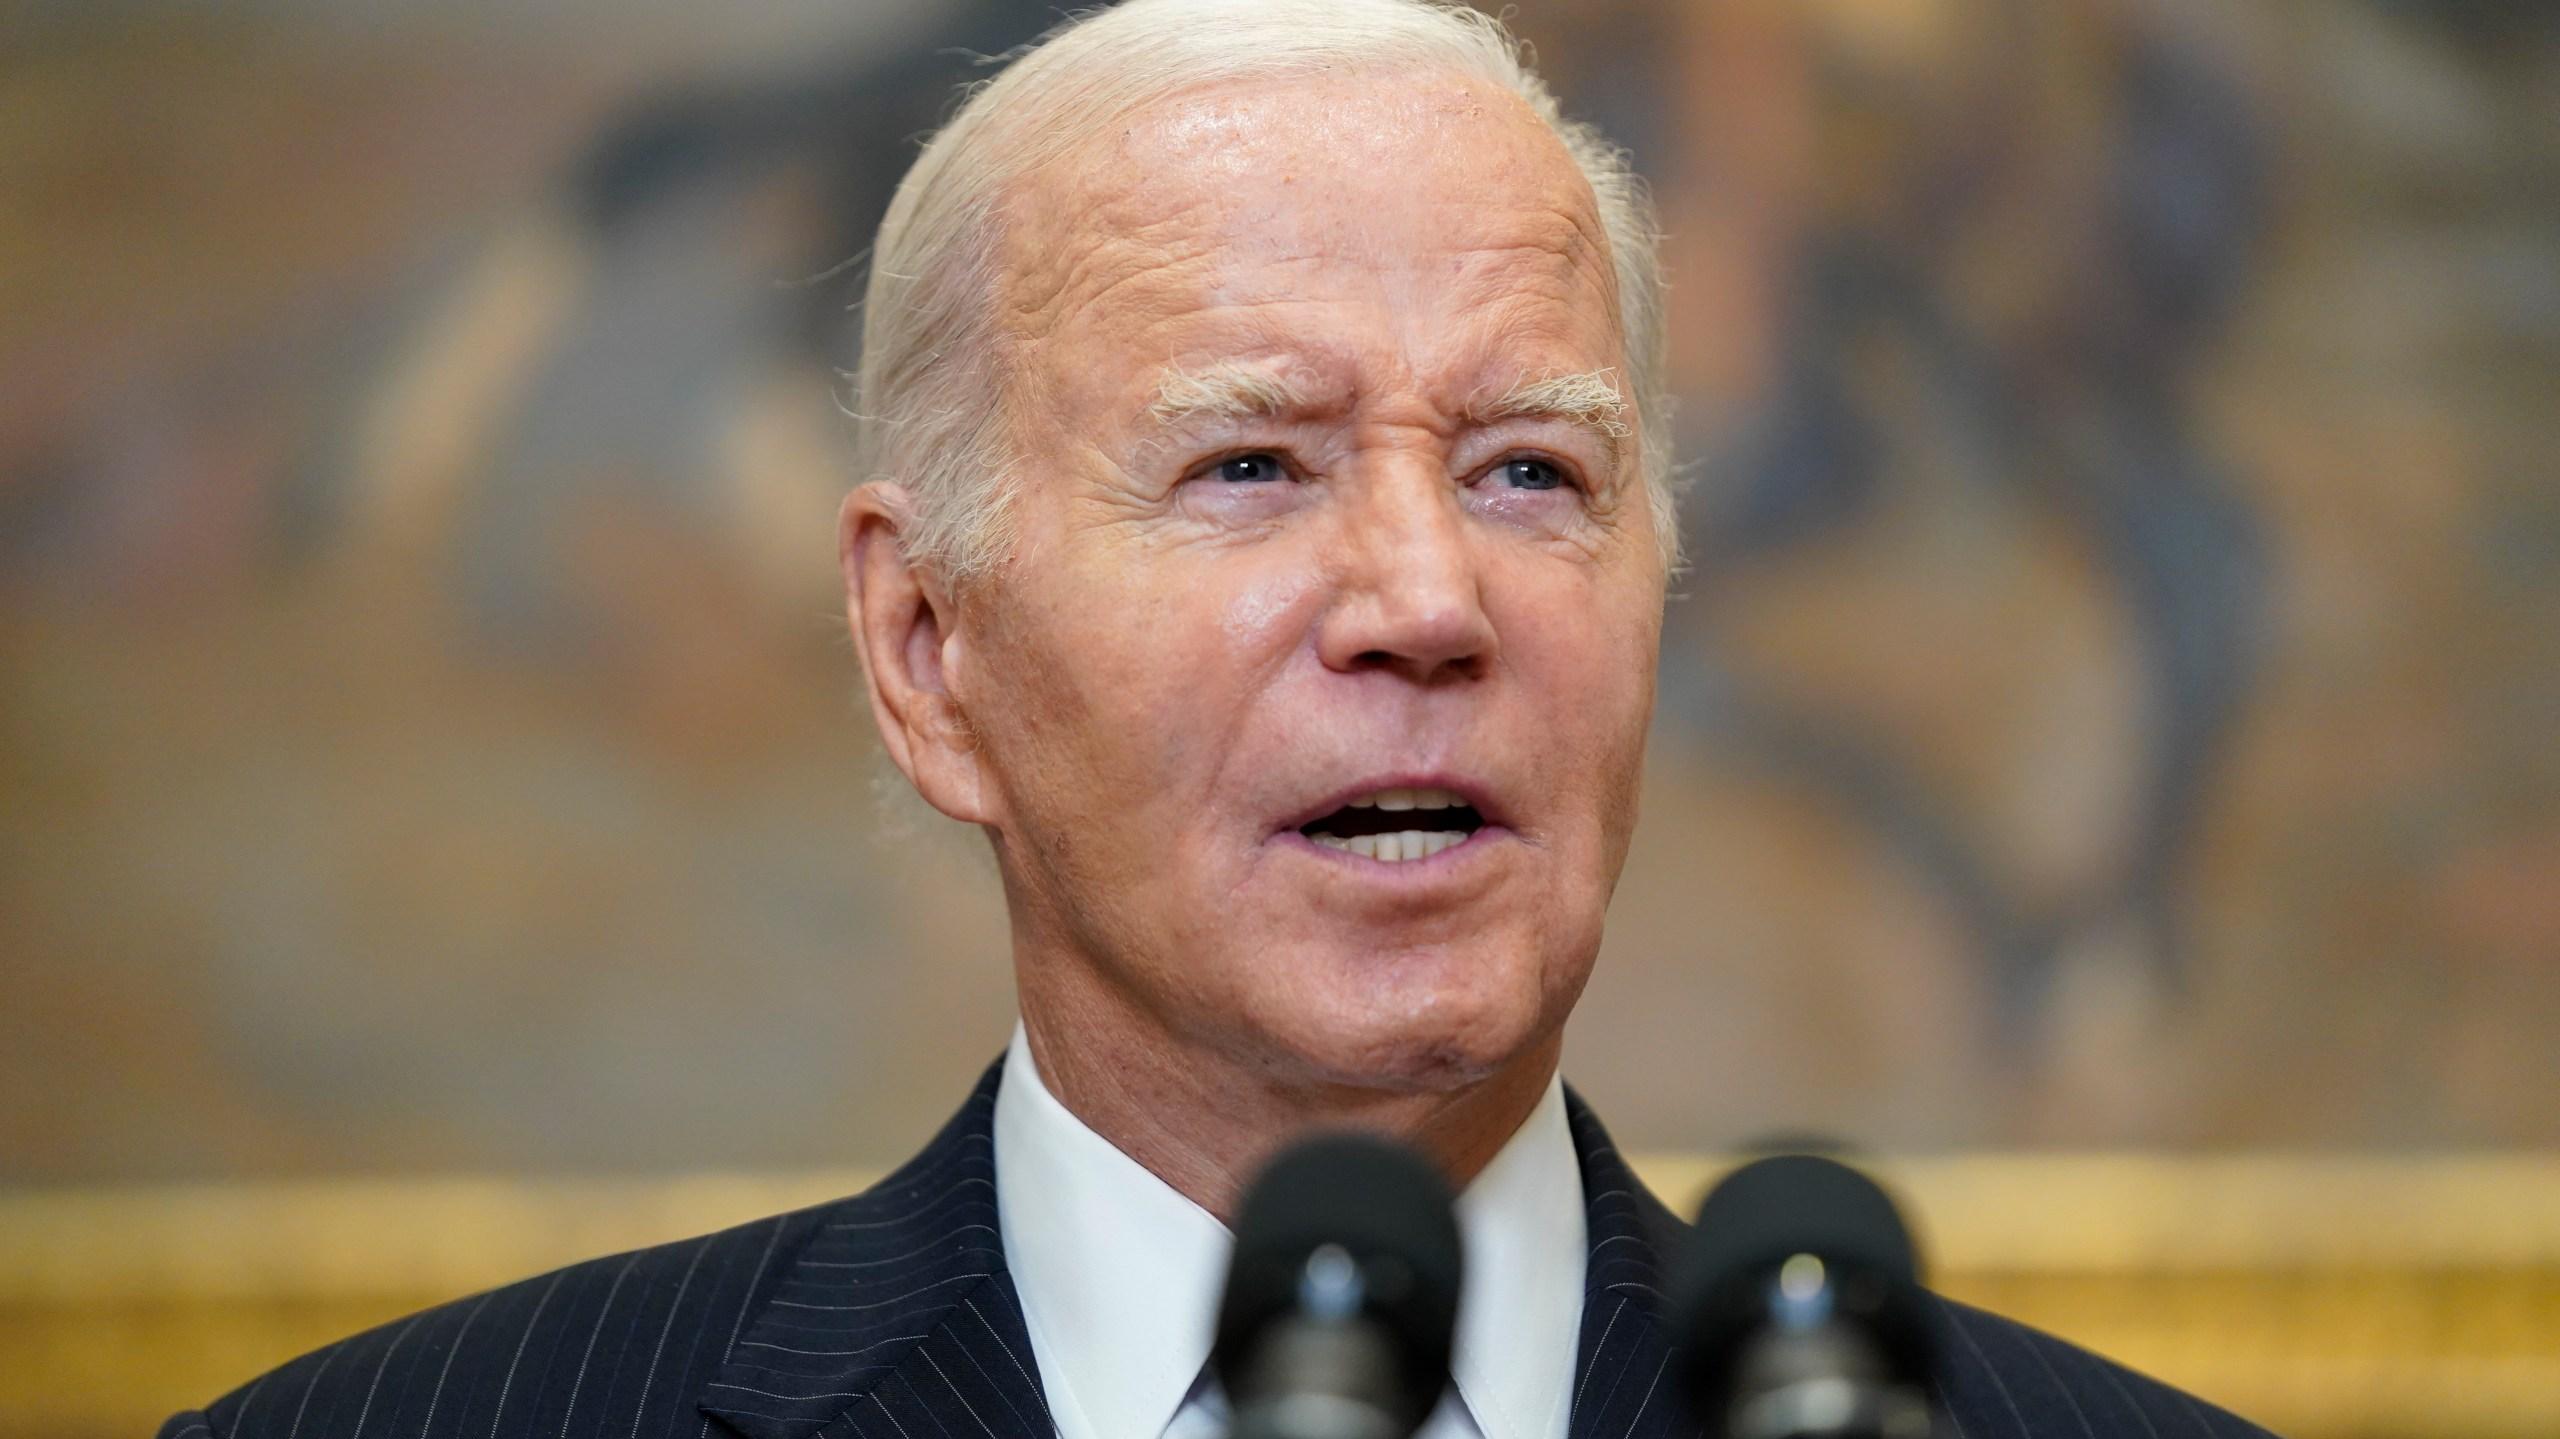 Biden says a meeting with Xi on sidelines of November APEC summit